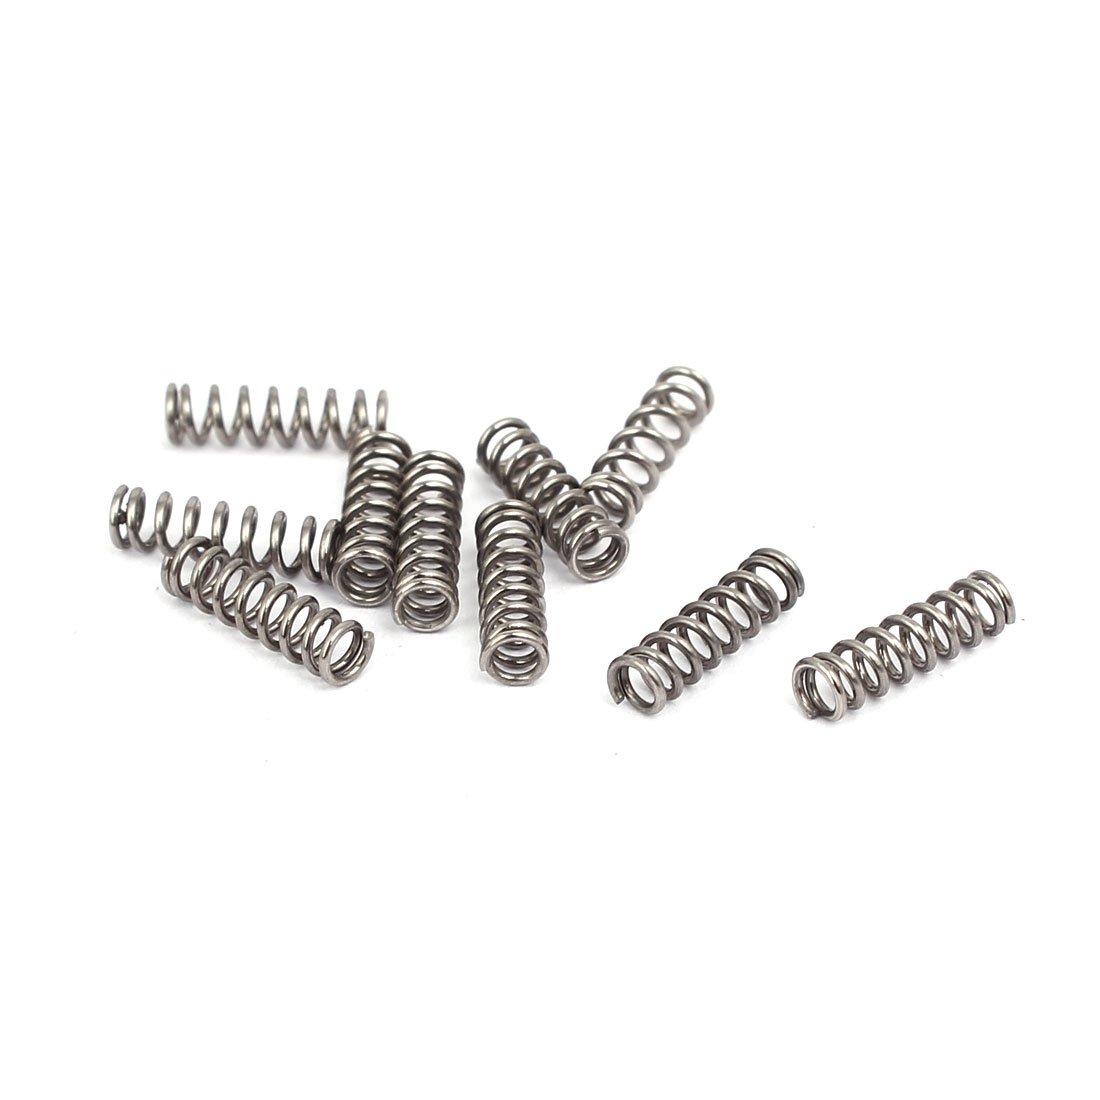 sourcingmap Compression Spring,304 Stainless Steel,6mm OD,0.6mm Wire Size,50mm Free Length,Silver Tone,10Pcs 